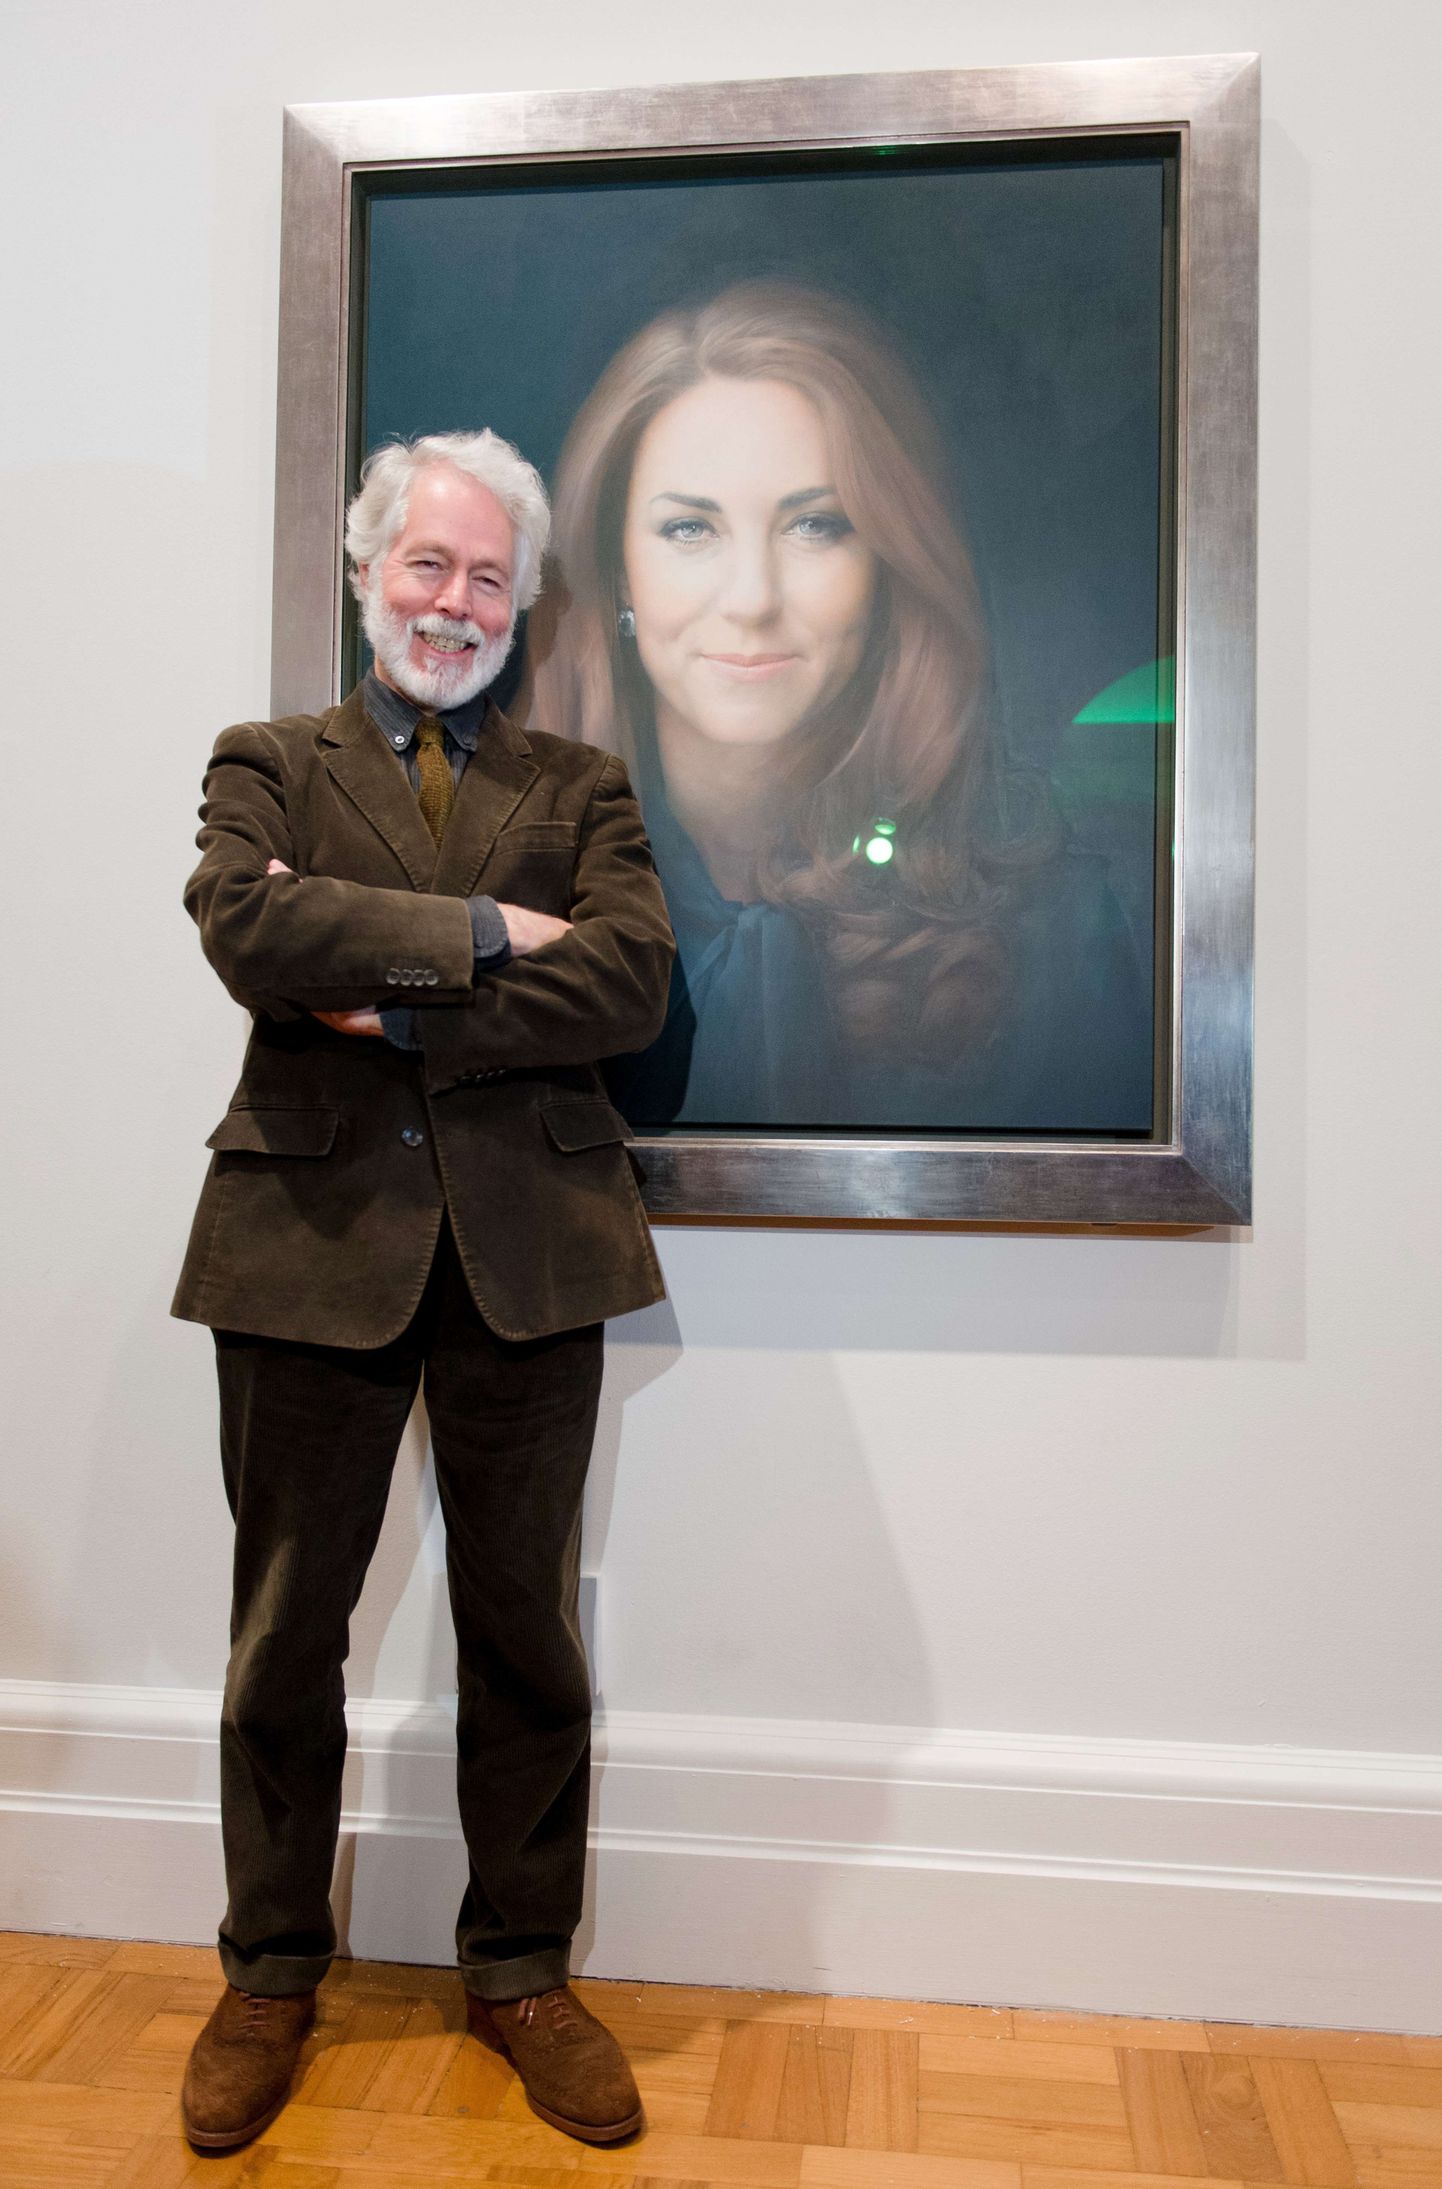 British artist Paul Emsley poses in front of his portrait of Catherine, The Duchess of Cambridge after its unveiling at the National Portrait Gallery in central London on January 11, 2013. This is the first official portrait of the Duchess and was completed after two sittings at the artist's studio and Kensington Palace.  AFP PHOTO/Leon NEAL - RESTRICTED TO EDITORIAL USE, MANDATORY MENTION OF THE ARTIST UPON PUBLICATION, TO ILLUSTRATE THE EVENT AS SPECIFIED IN THE CAPTION  -